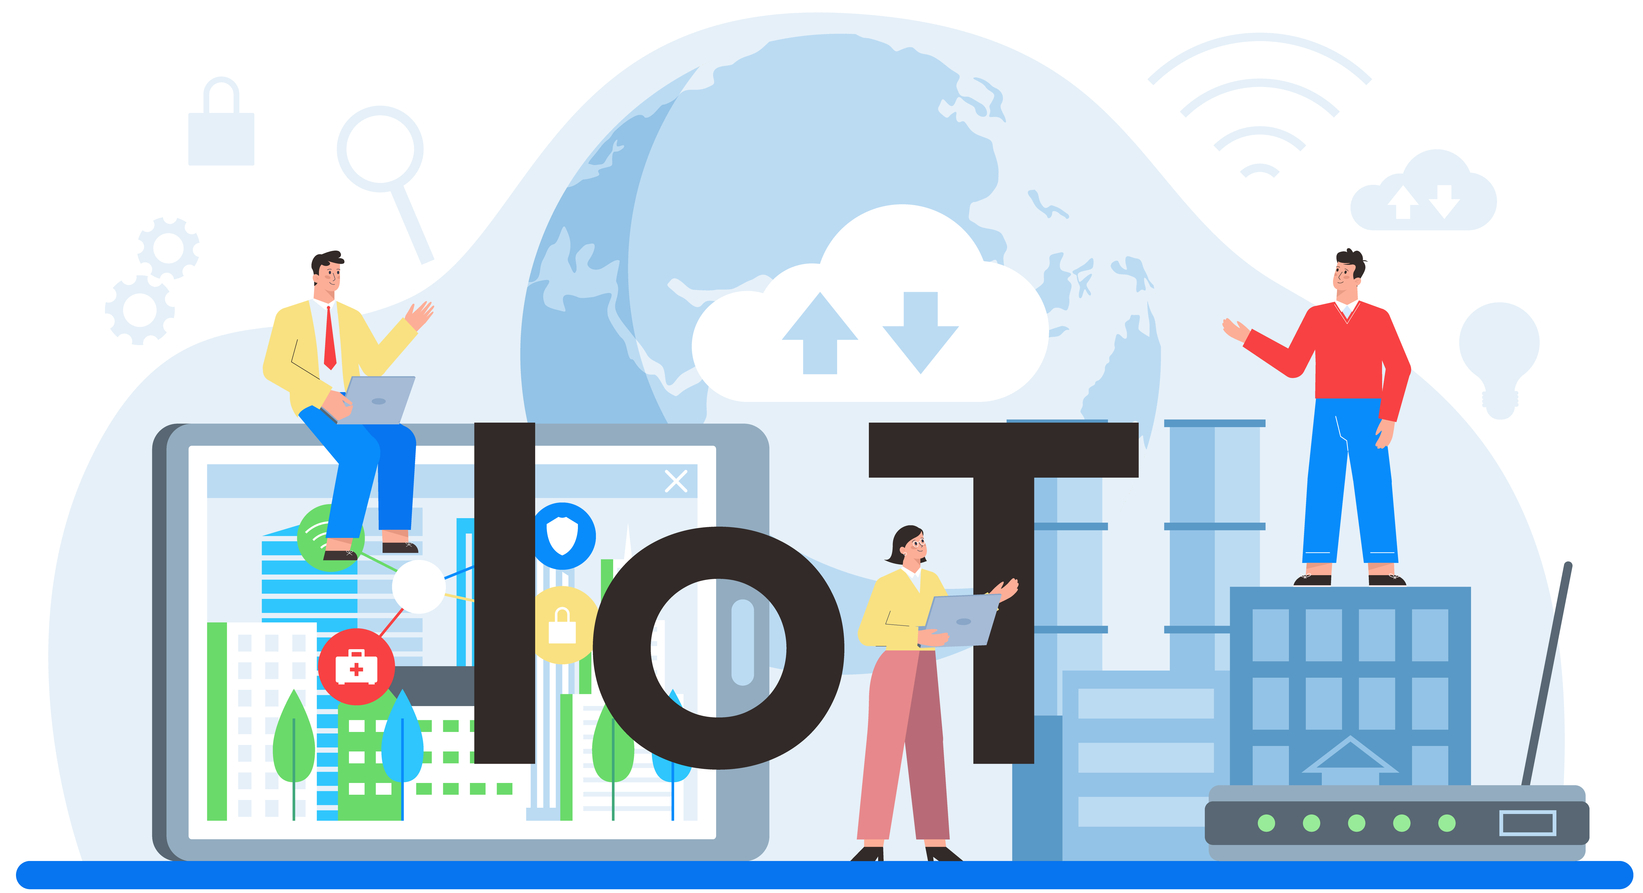 Edge Computing and the Internet of Things (IoT): A Powerful Combination for the Future